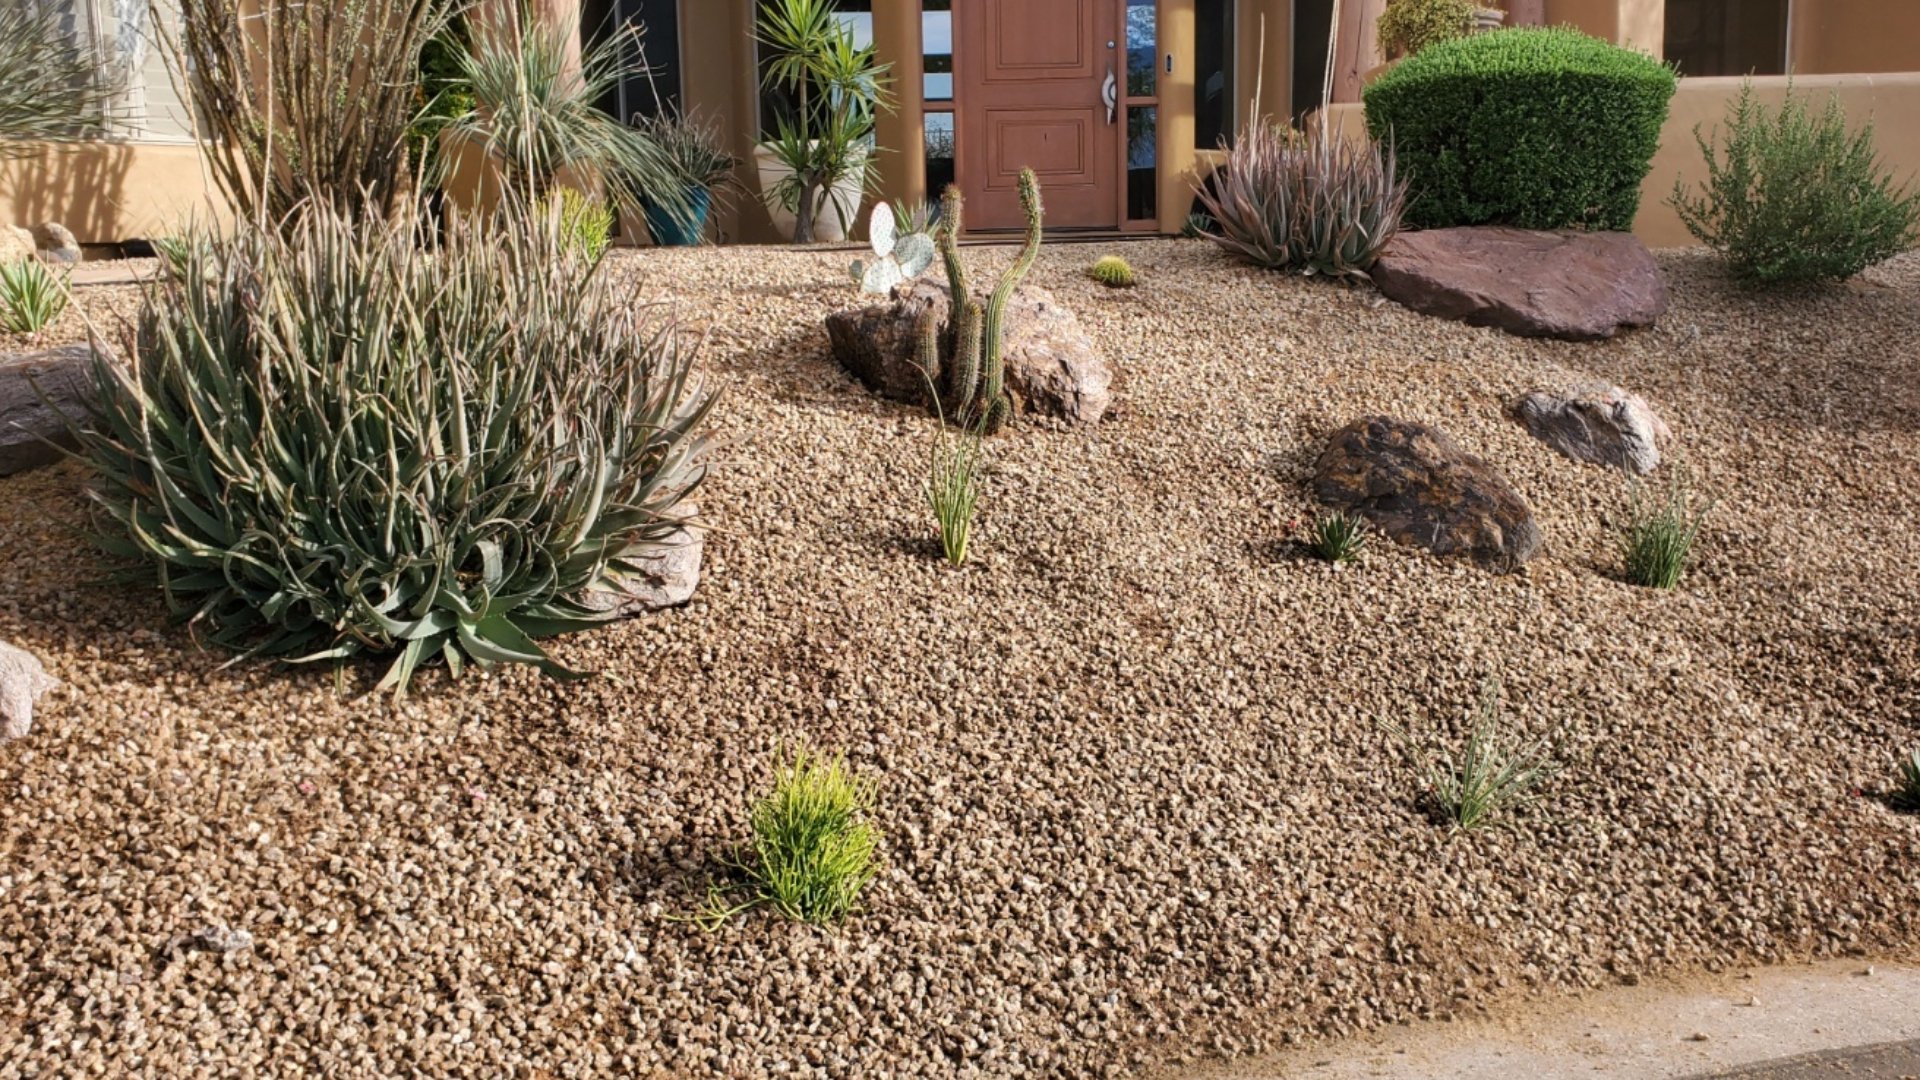 Xeriscaping - What Is It & Why It's Important for Landscapes in Arizona